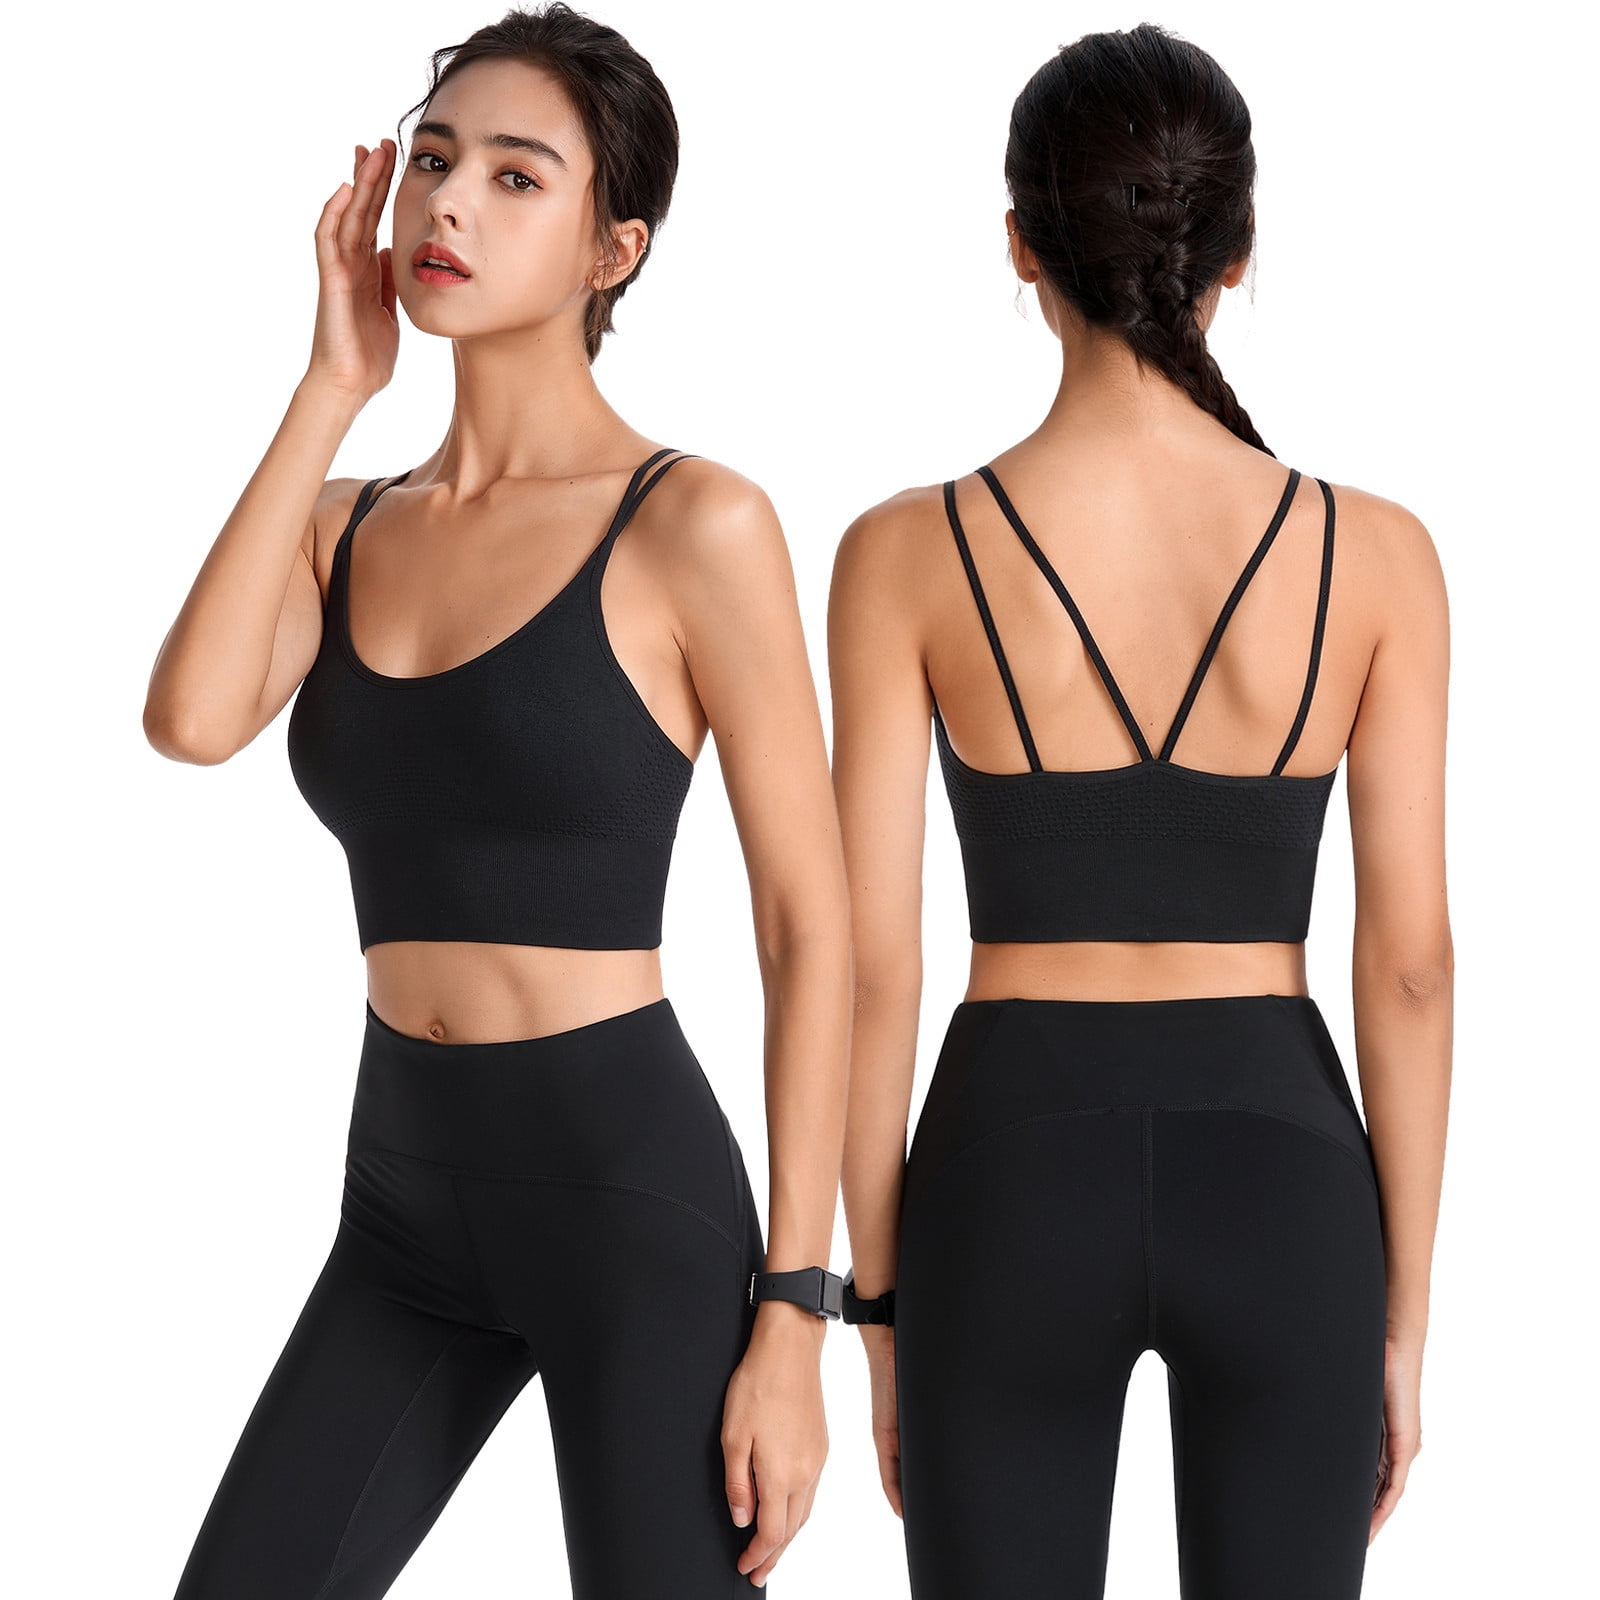 Push Up Sports Bras For Women Deals!AIEOTT Sexy Comfortable Plus Size Bra，Women  Bra With String Quick Dry Shockproof Running Fitness Underwear,Fashion  Gifts for Women,Yoga Bra,Summer Savings Clearance 